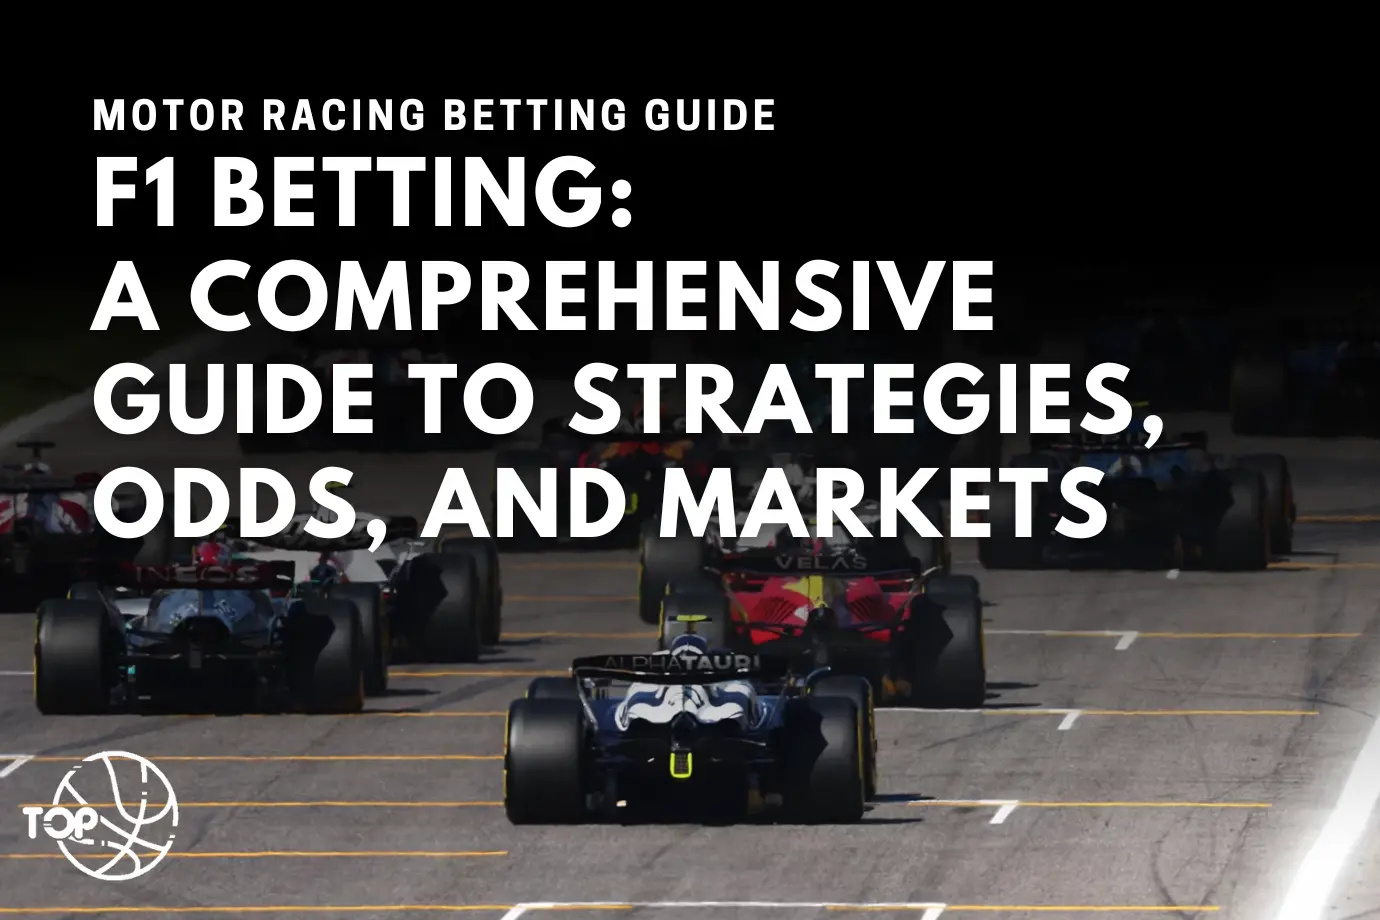 F1 Betting: A Comprehensive Guide to Strategies, Odds, and Markets